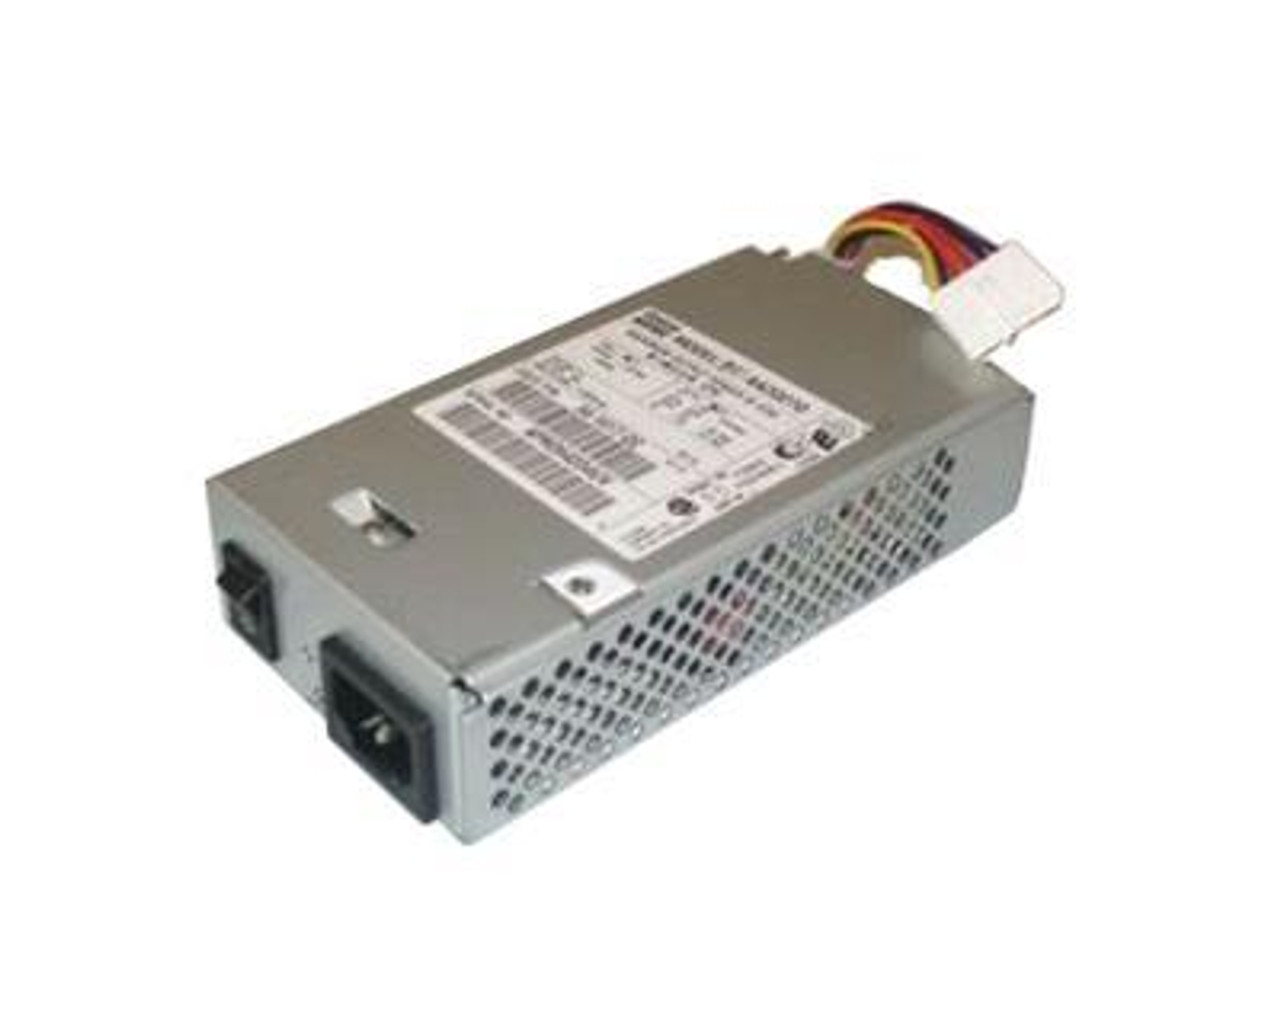 AS5200-PWR-AC Cisco AC Power Supply for As5200 (Refurbished)